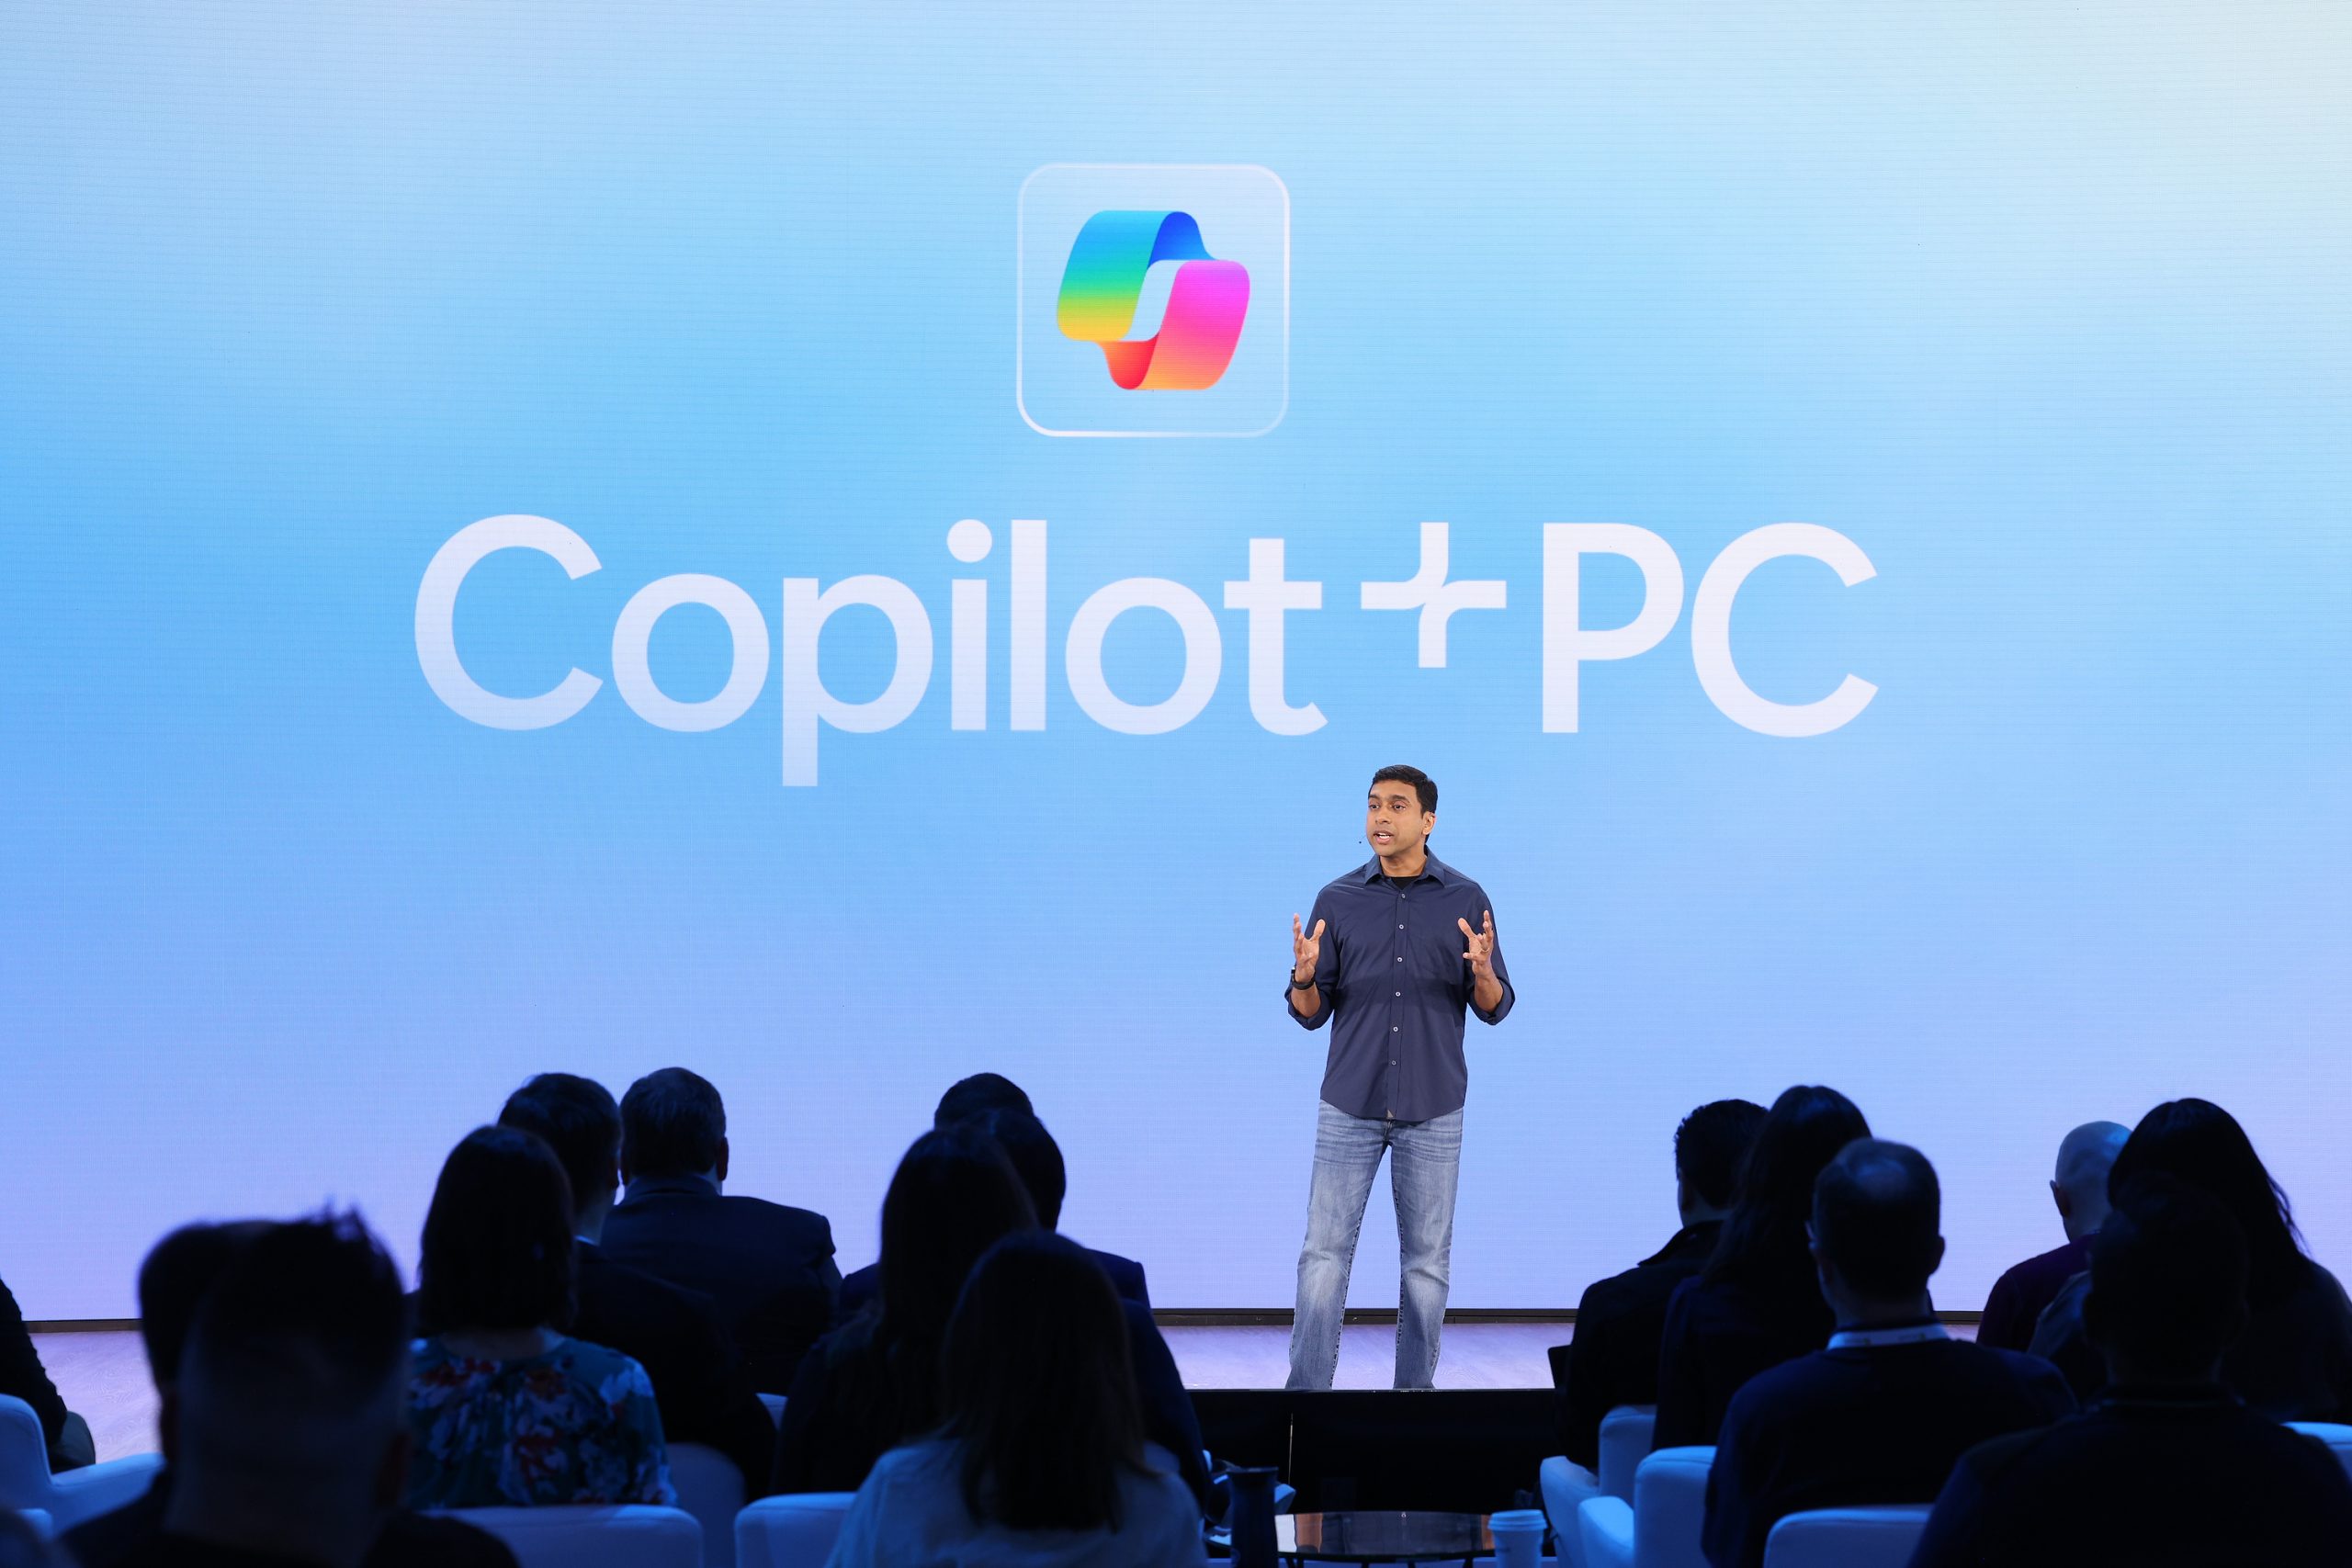 A man standing on stage in front of an audience, with the Copilot+ PC logo on the screen behind him